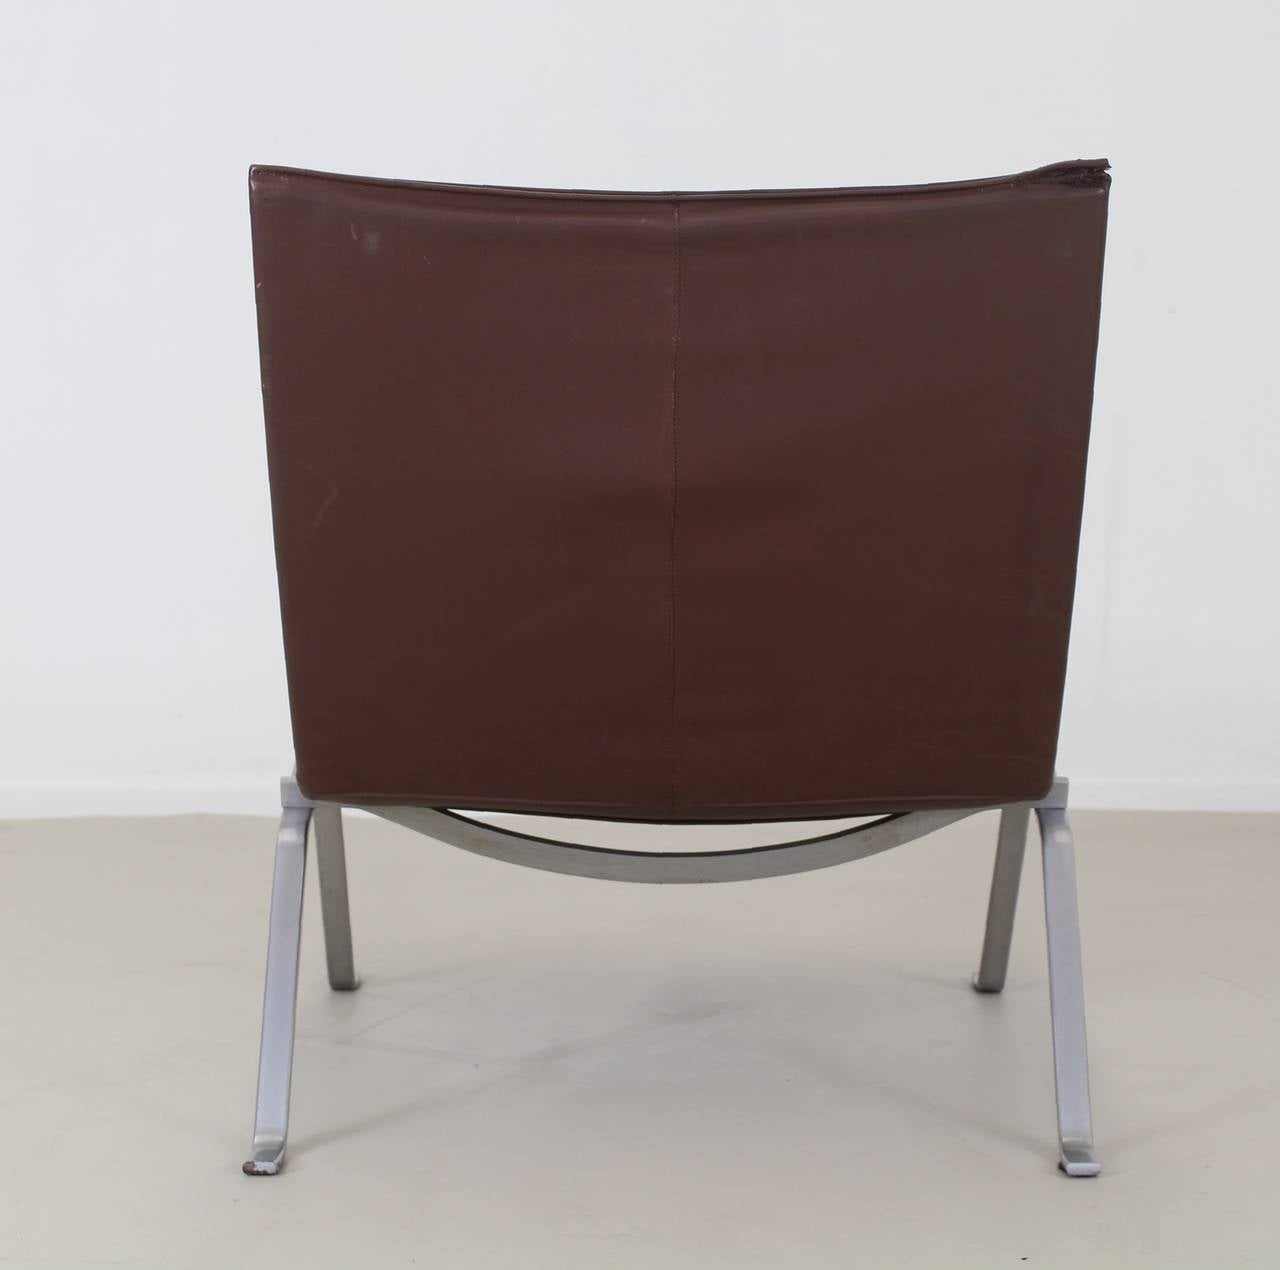 Mid-Century Modern EKC PK22 with Brown Original Leather Cover by Poul Kjaerholm